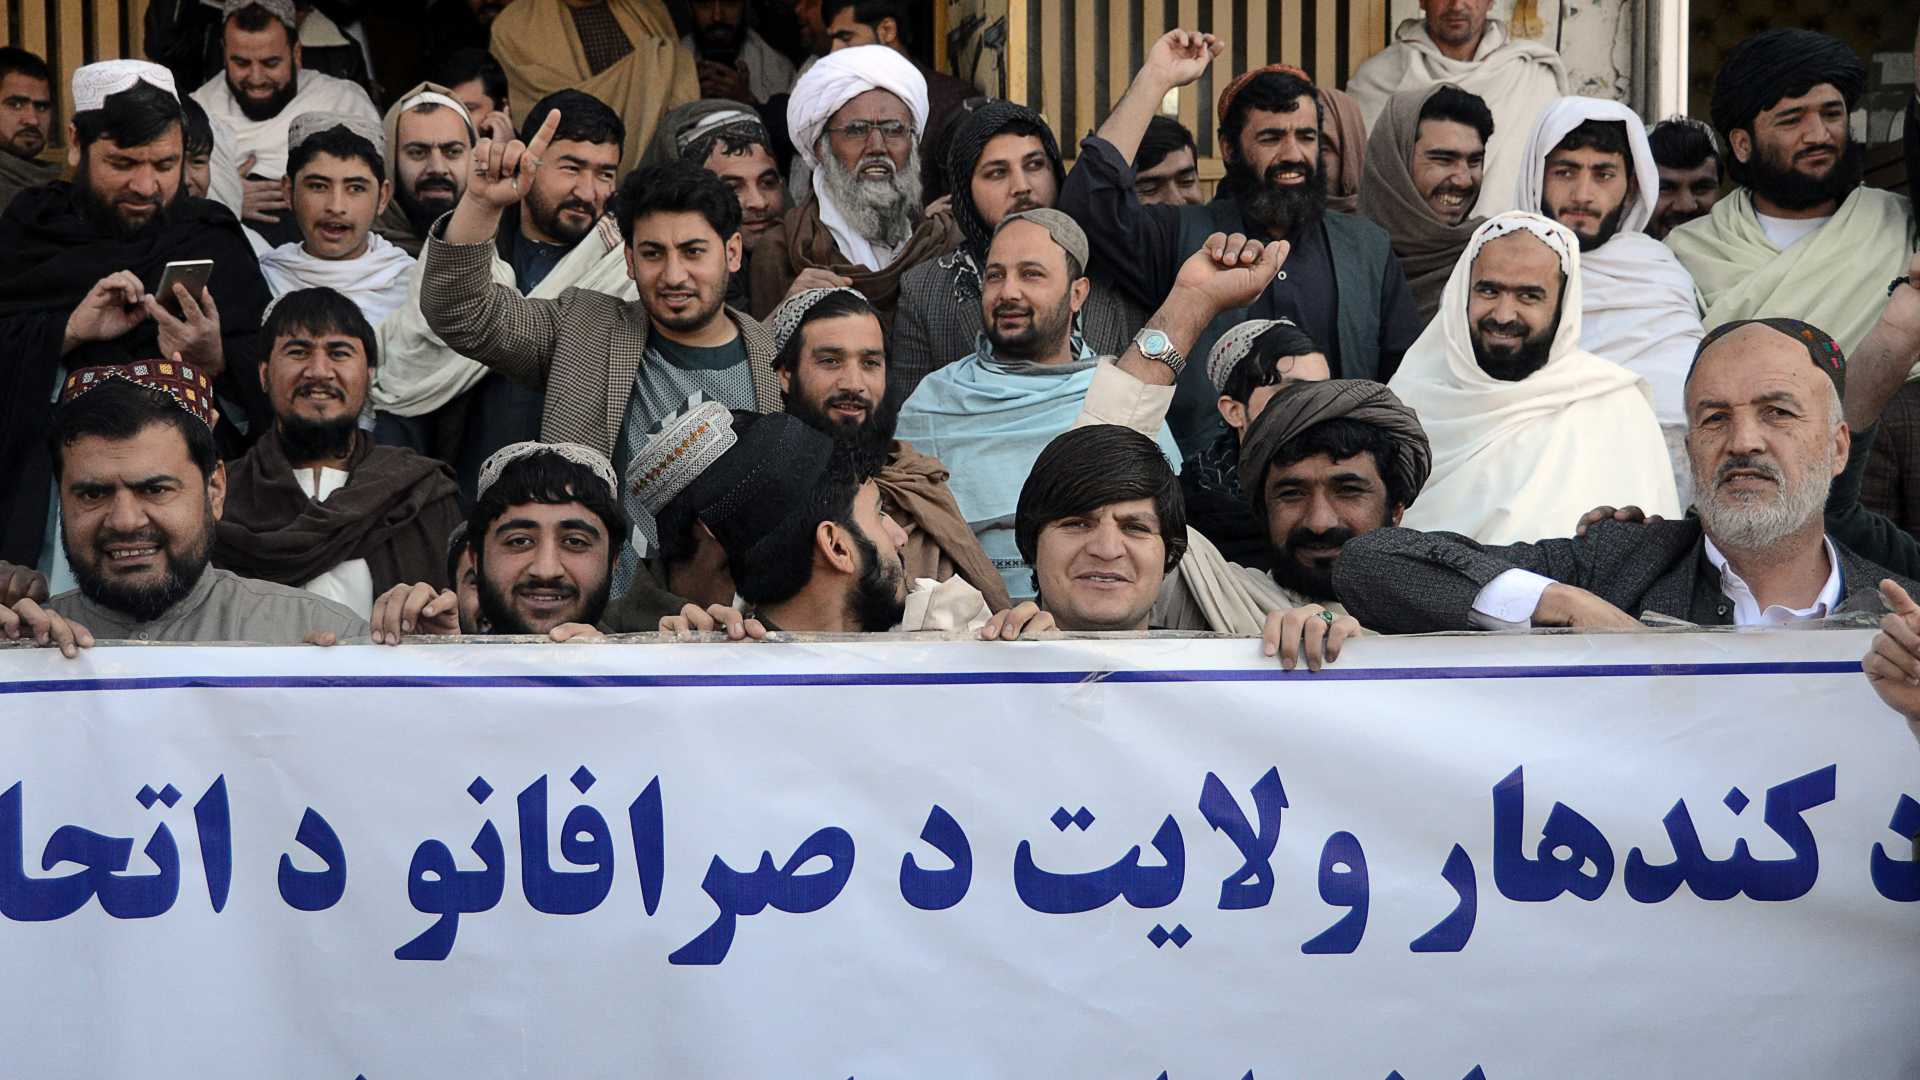 Businessmen and money changers participate in a protest against the recent remarks by U.S. President Joe Biden to freeze Afghanistan's assets, in Kandahar on February 15, 2022.